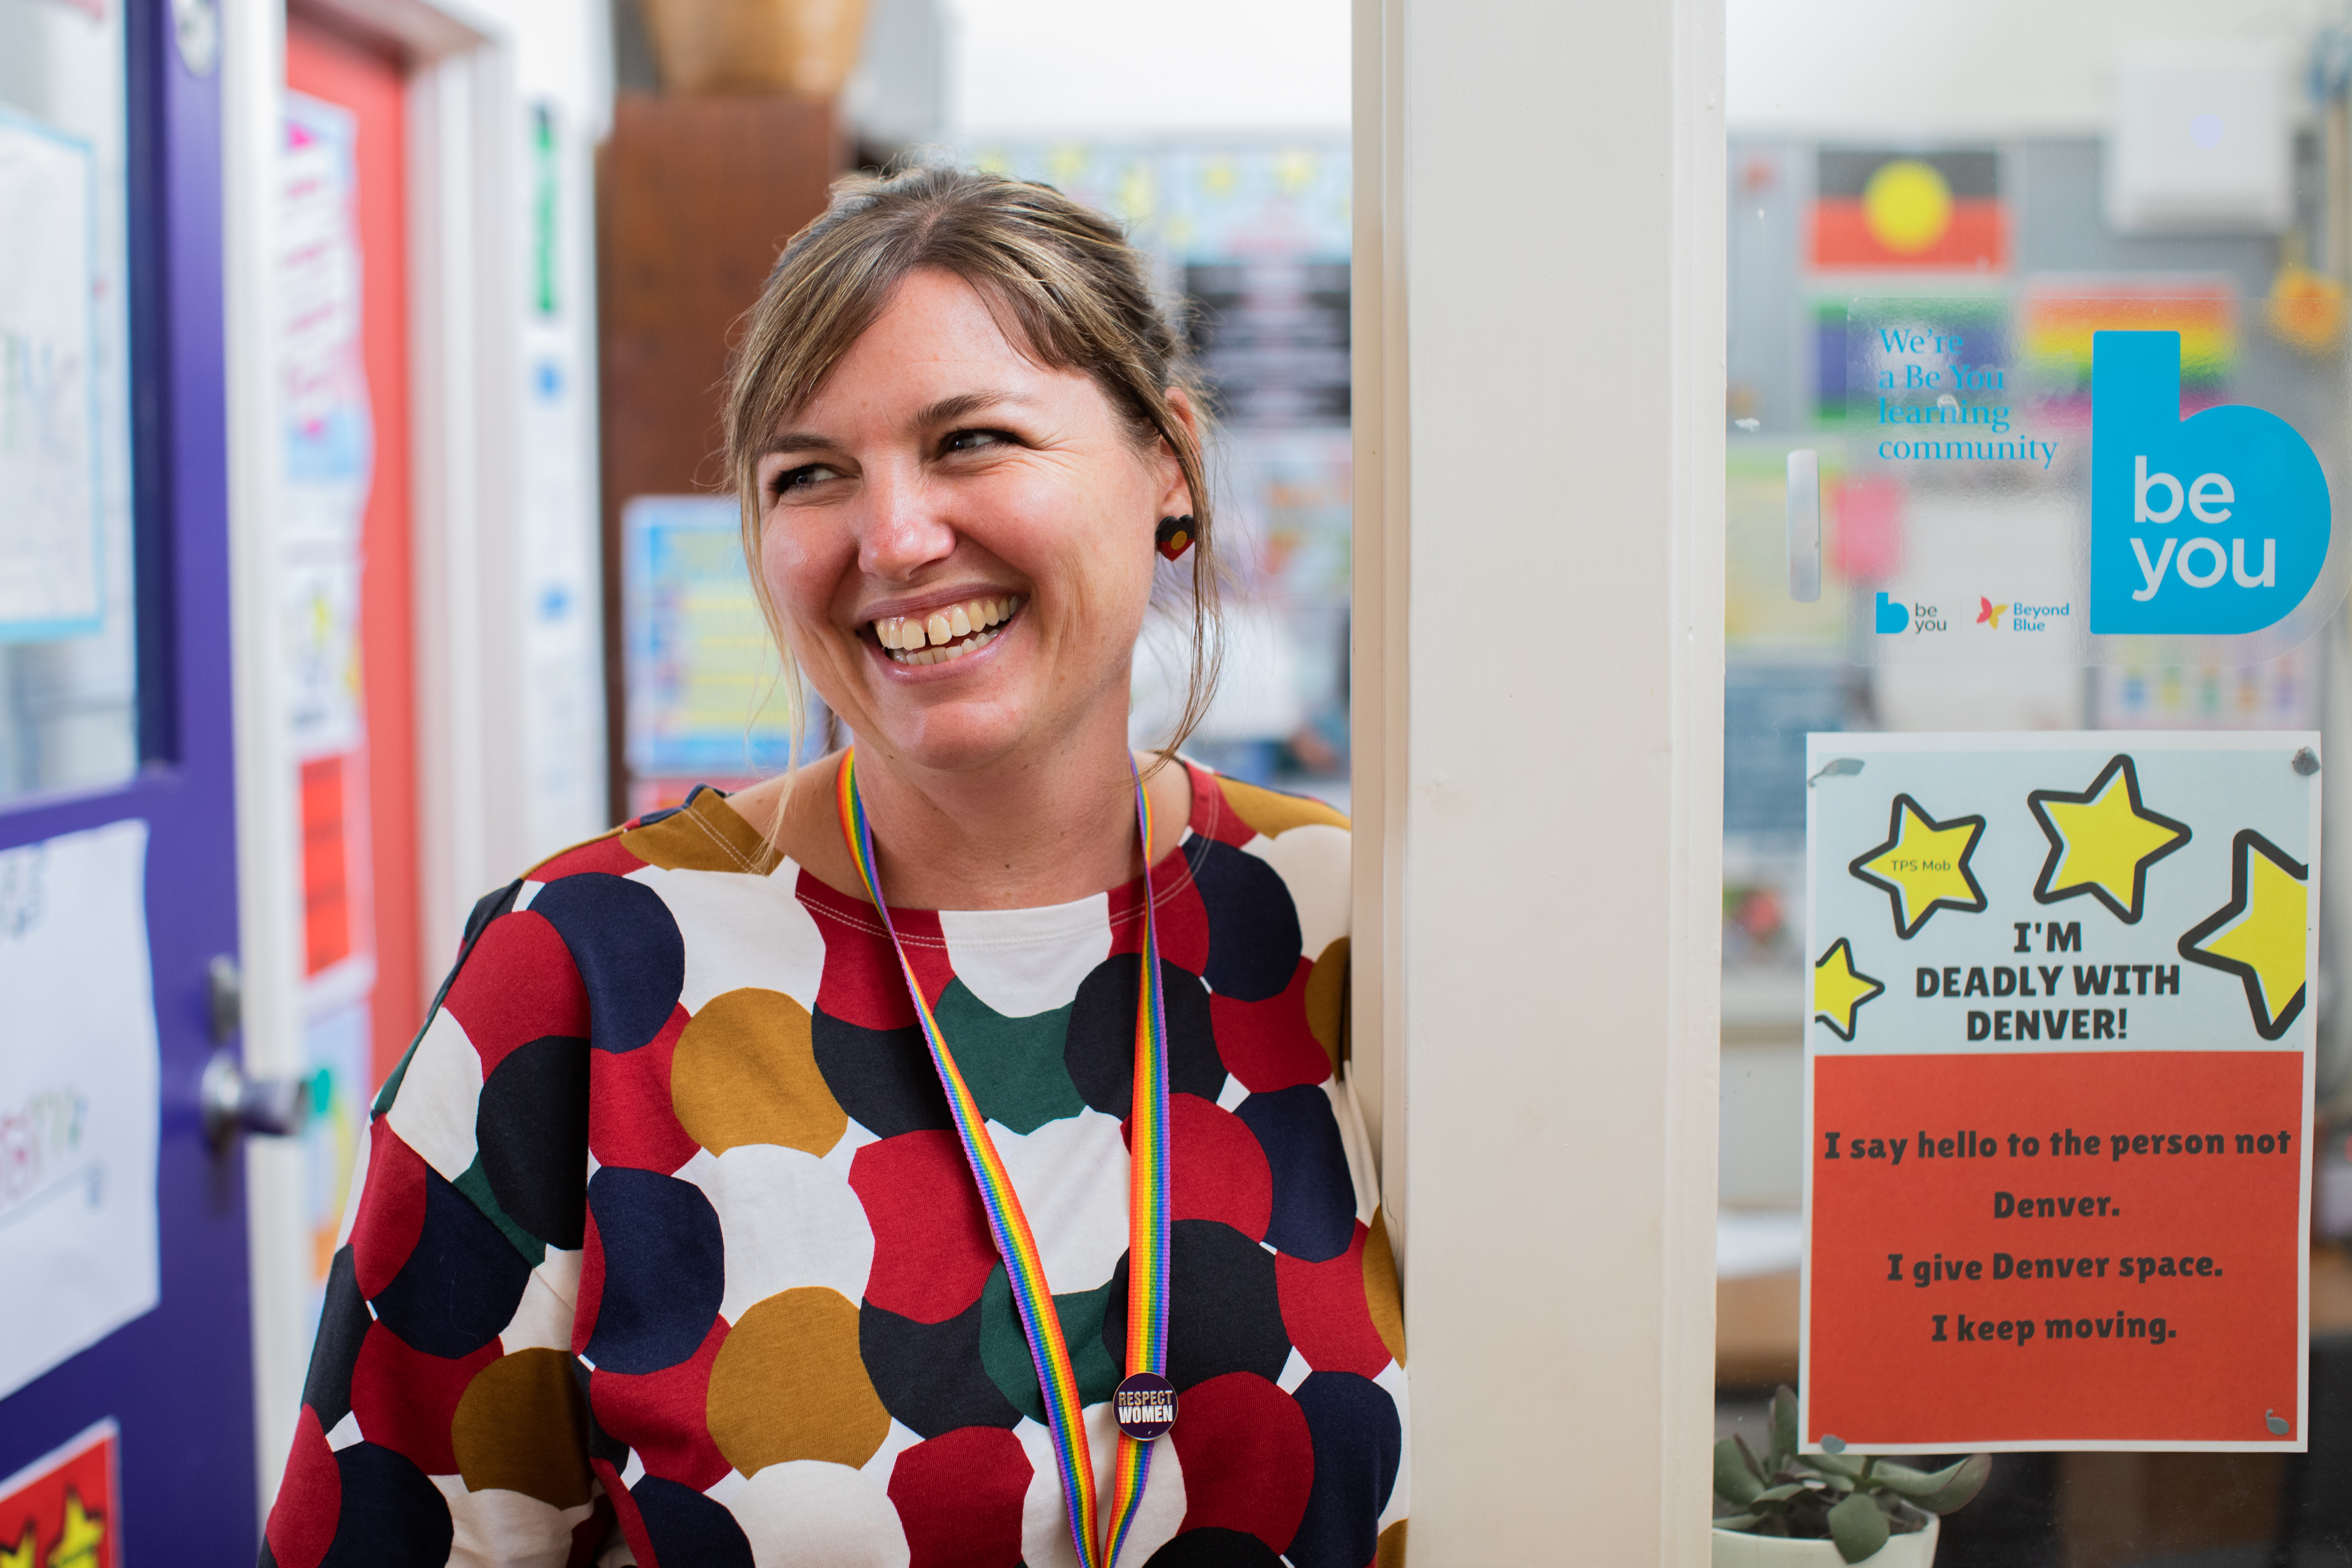 An educator standing in the doorway to an office, looking to their right and smiling.